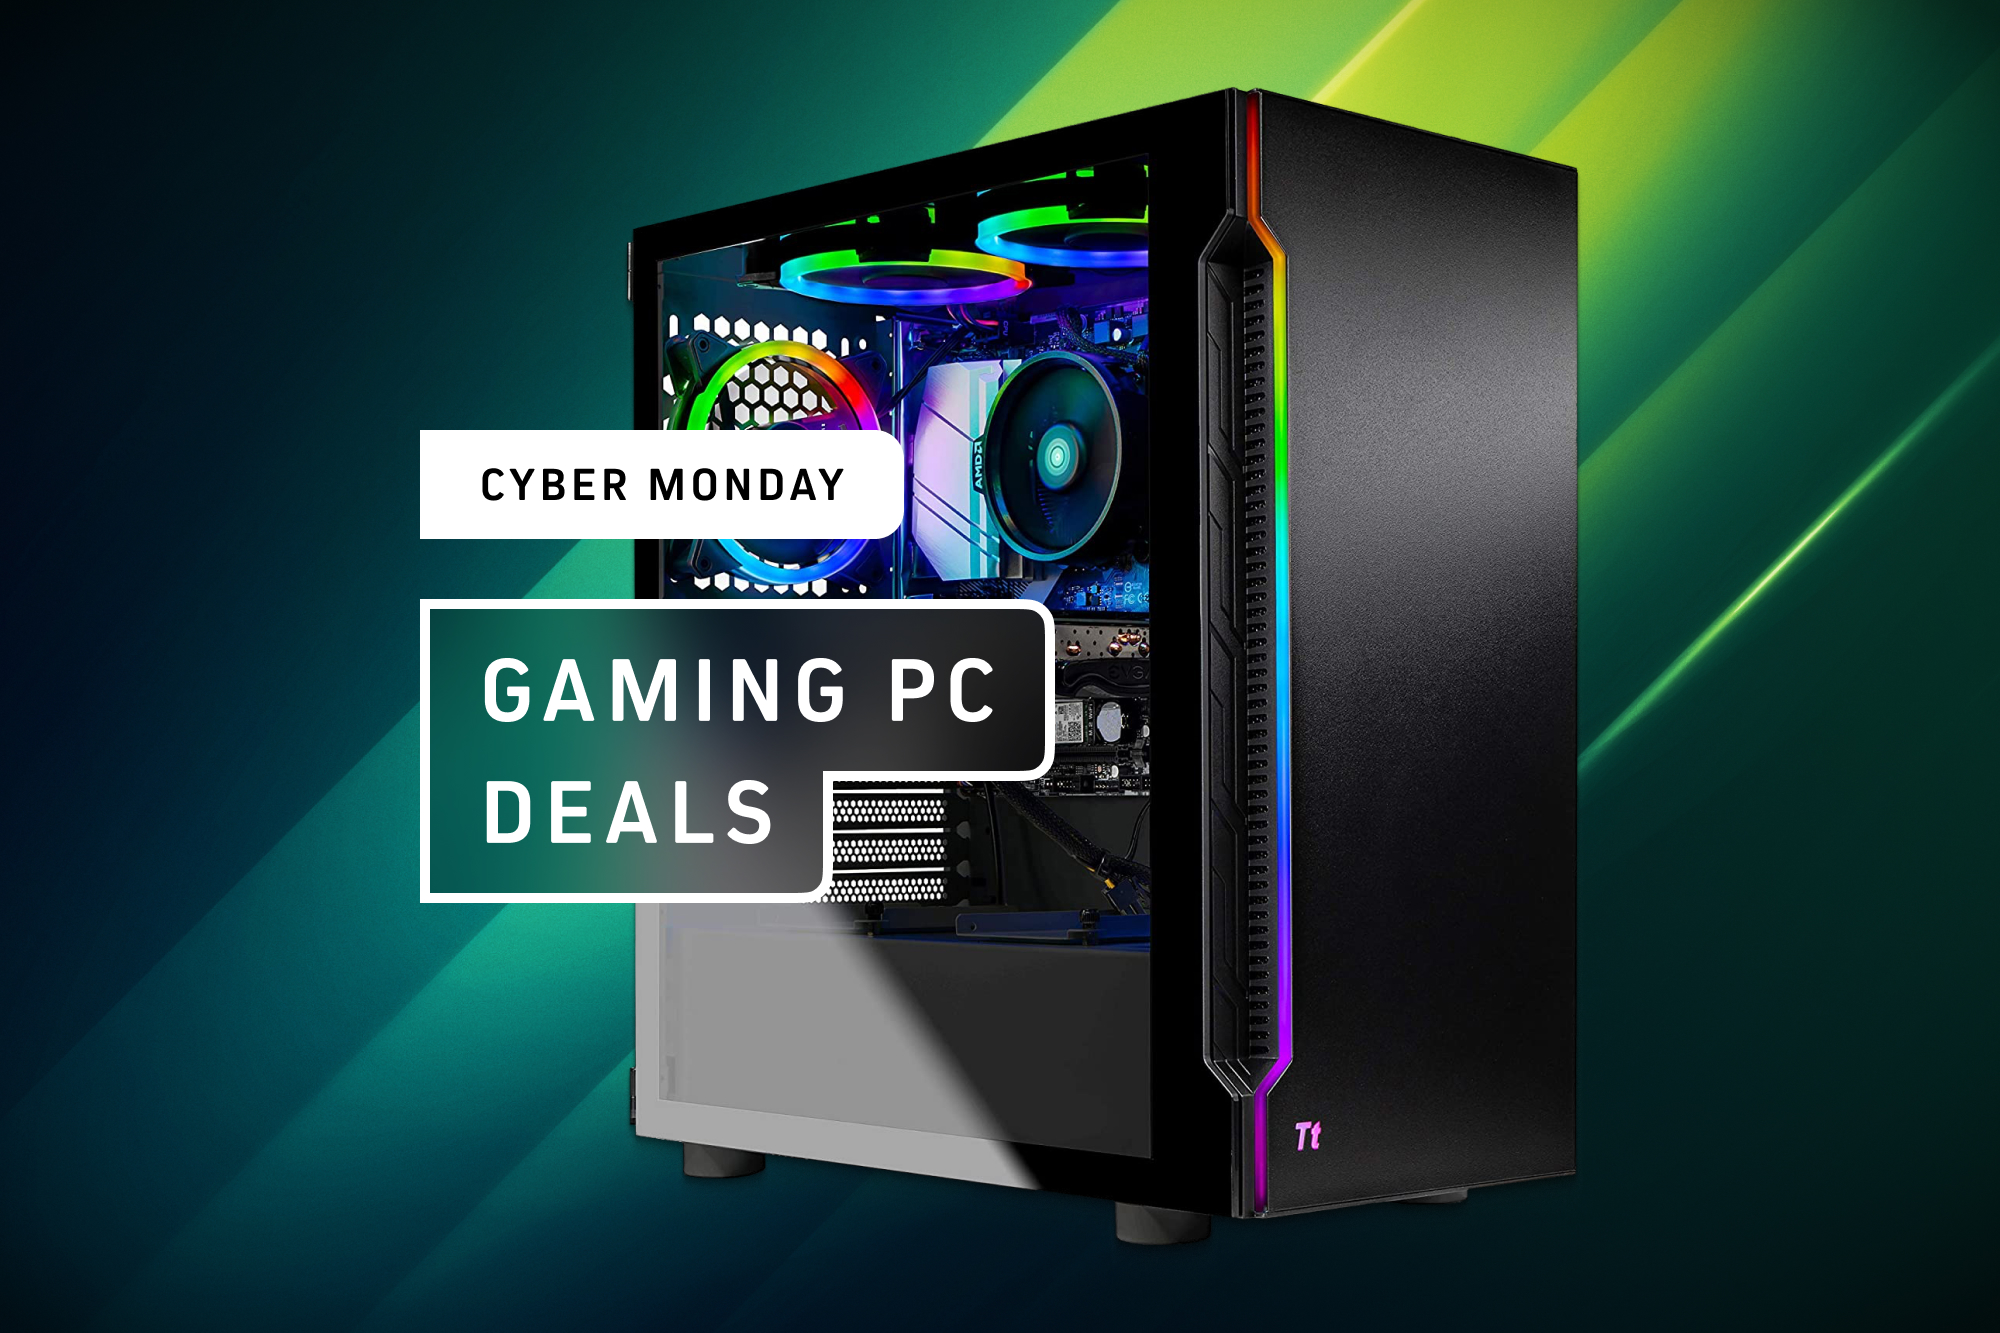 Cyber Monday Gaming Deals: these discounts may last | Digital Trends